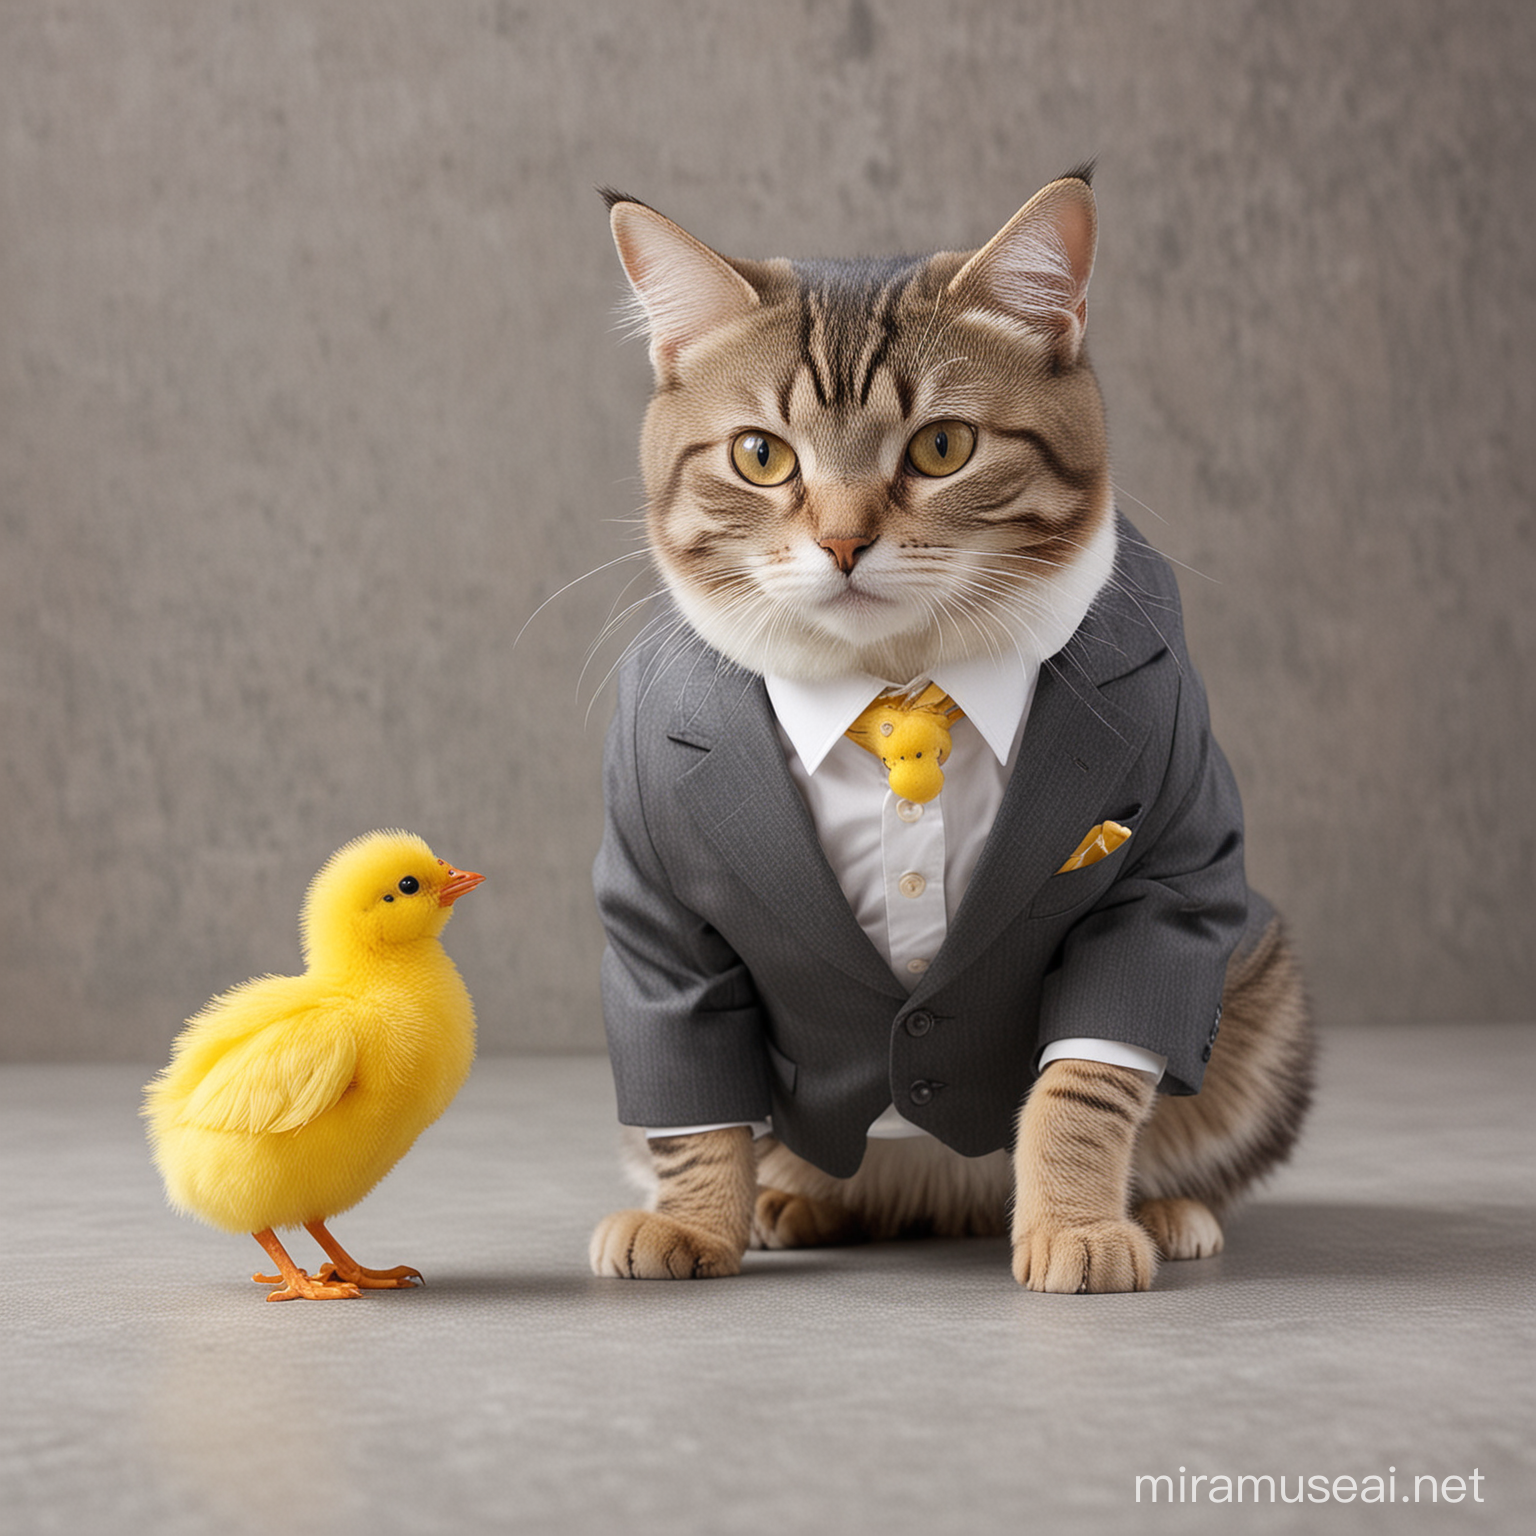 A cat in a suit petting a little yellow chick